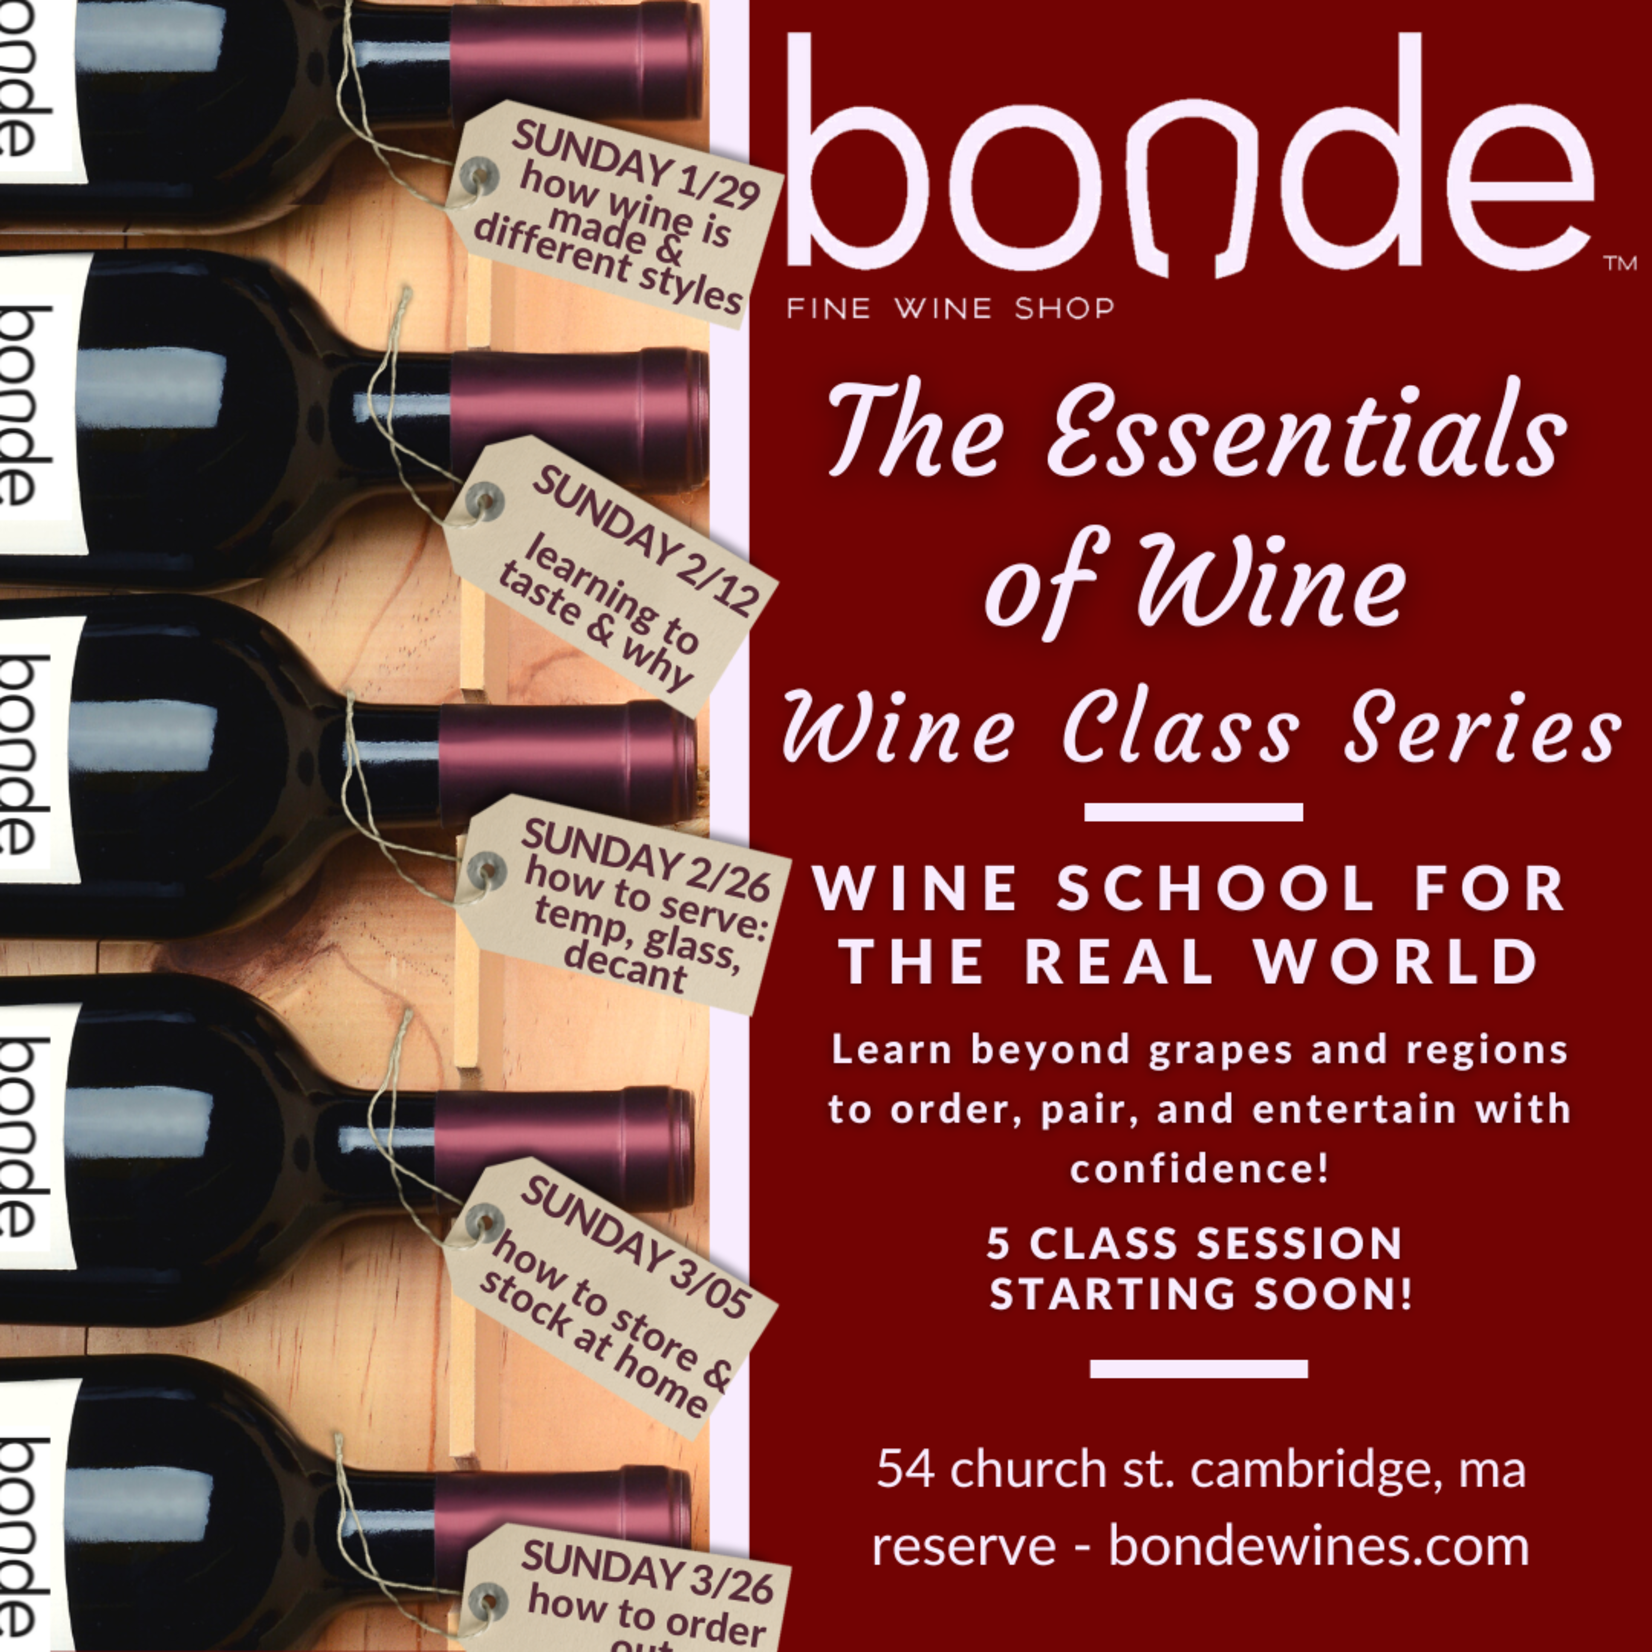 The Essentials of Wine - Bonde Wine Class Series - January 29 - March 26